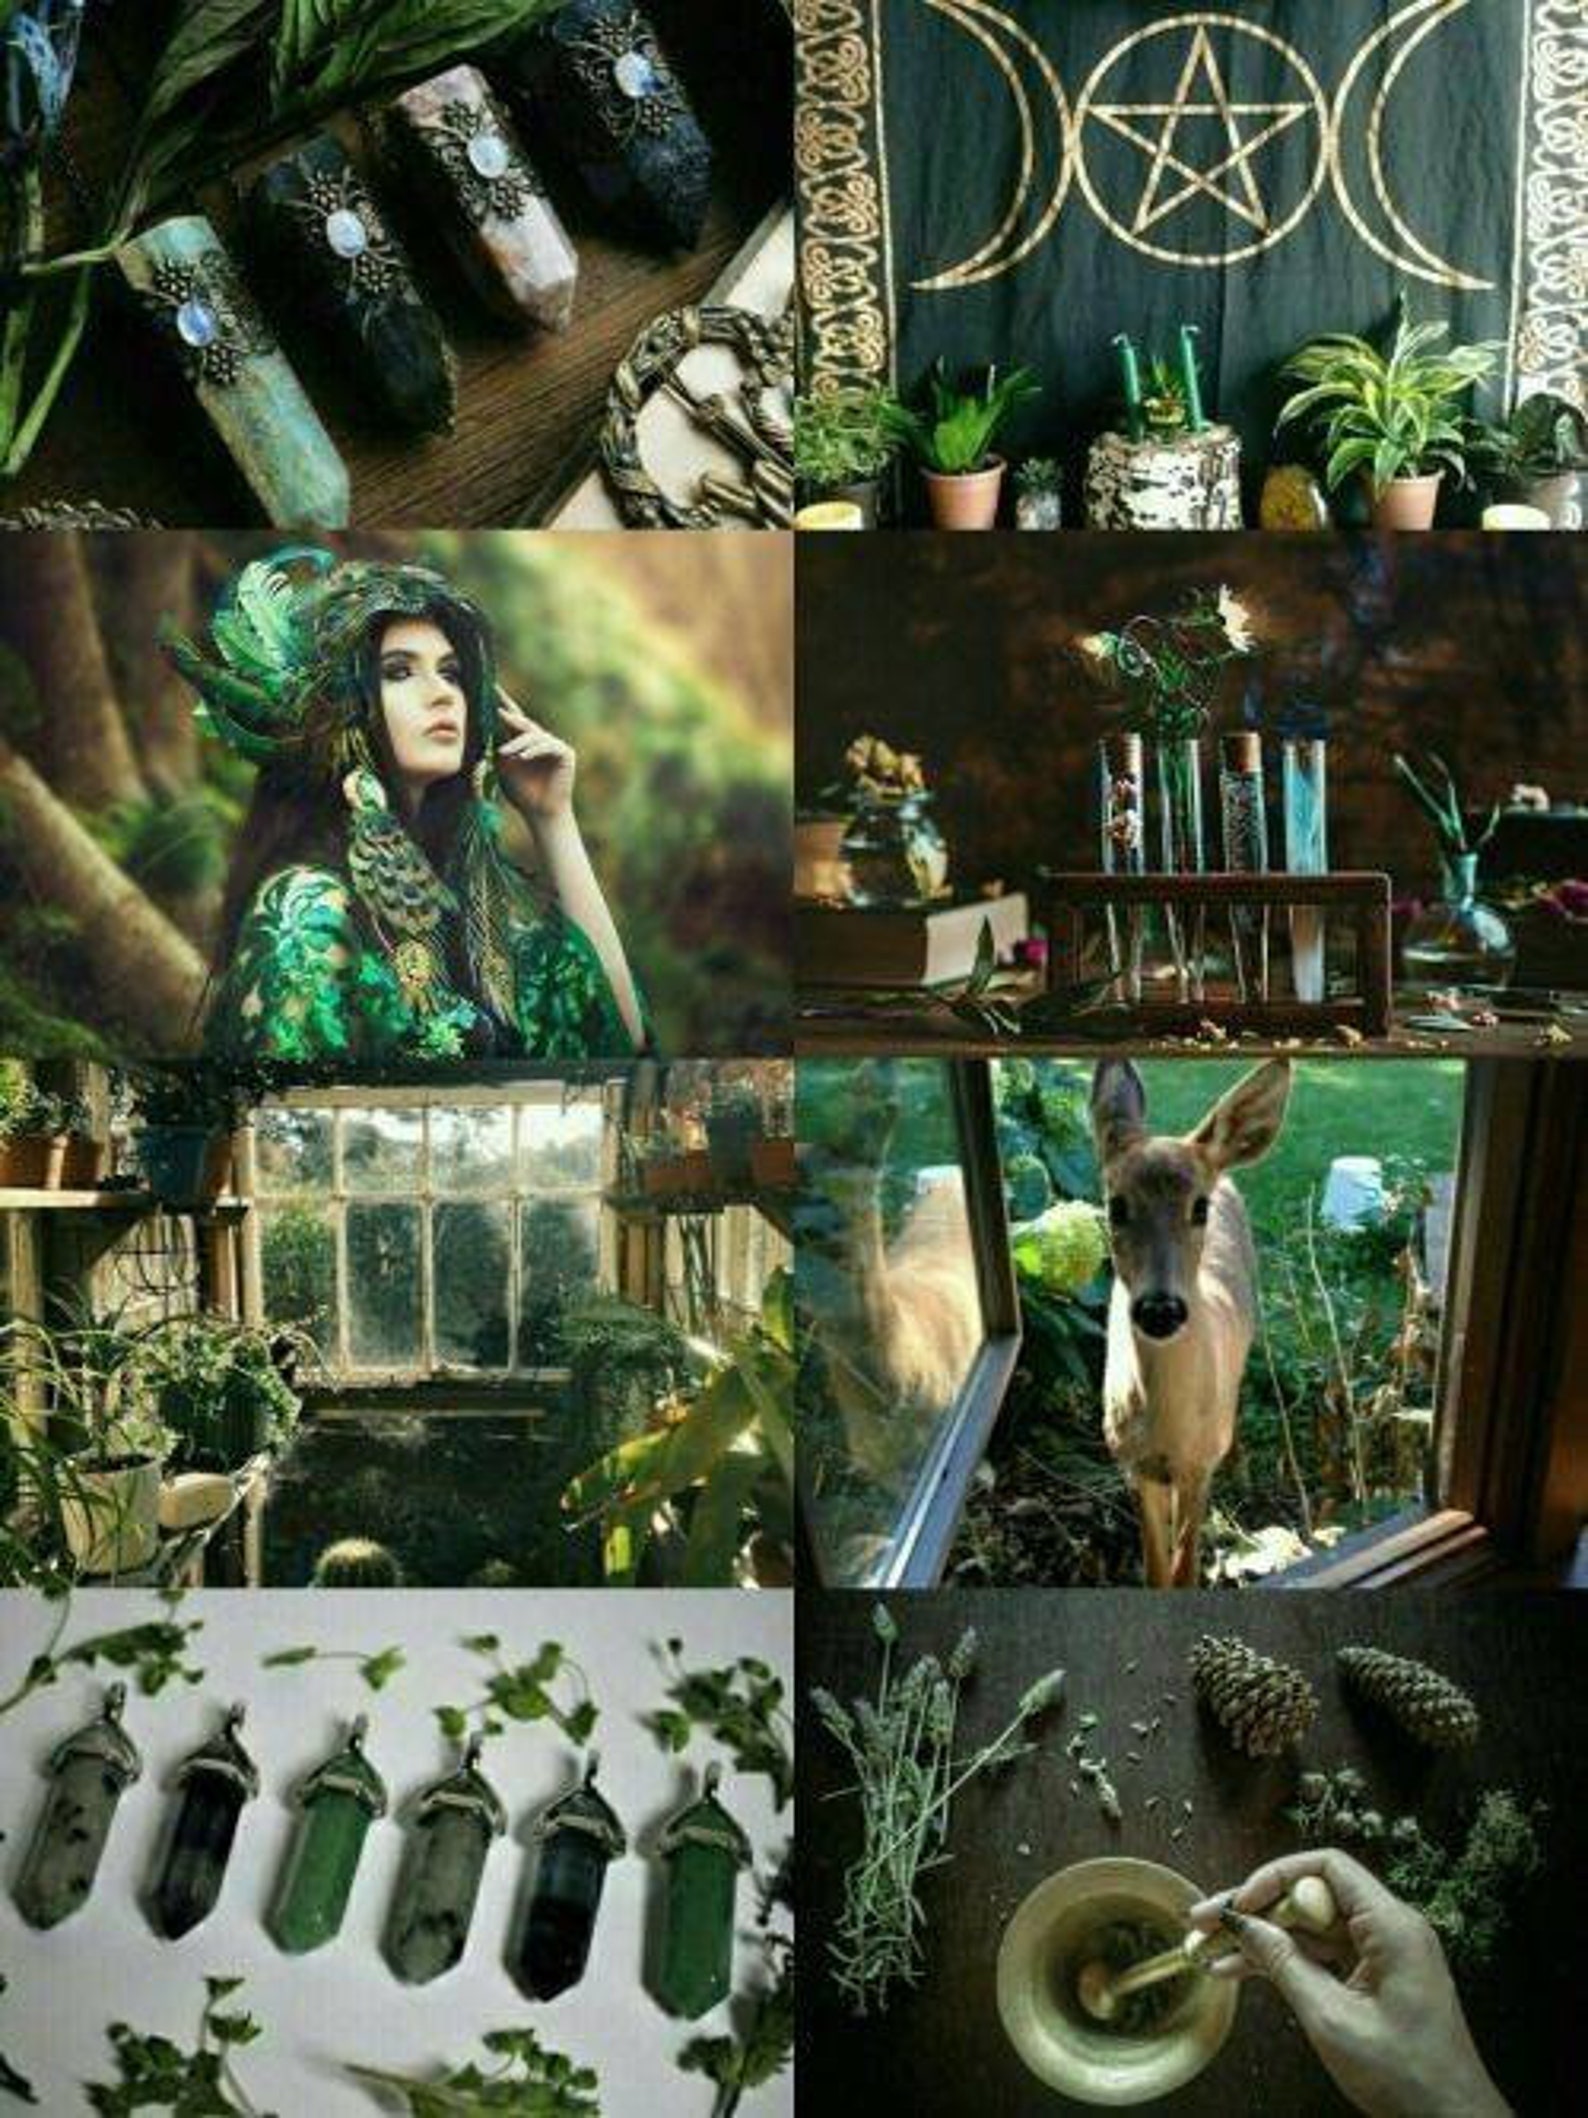 MYSTERY BOX witch aesthetic GREEN witch witchcraft tools & | Etsy